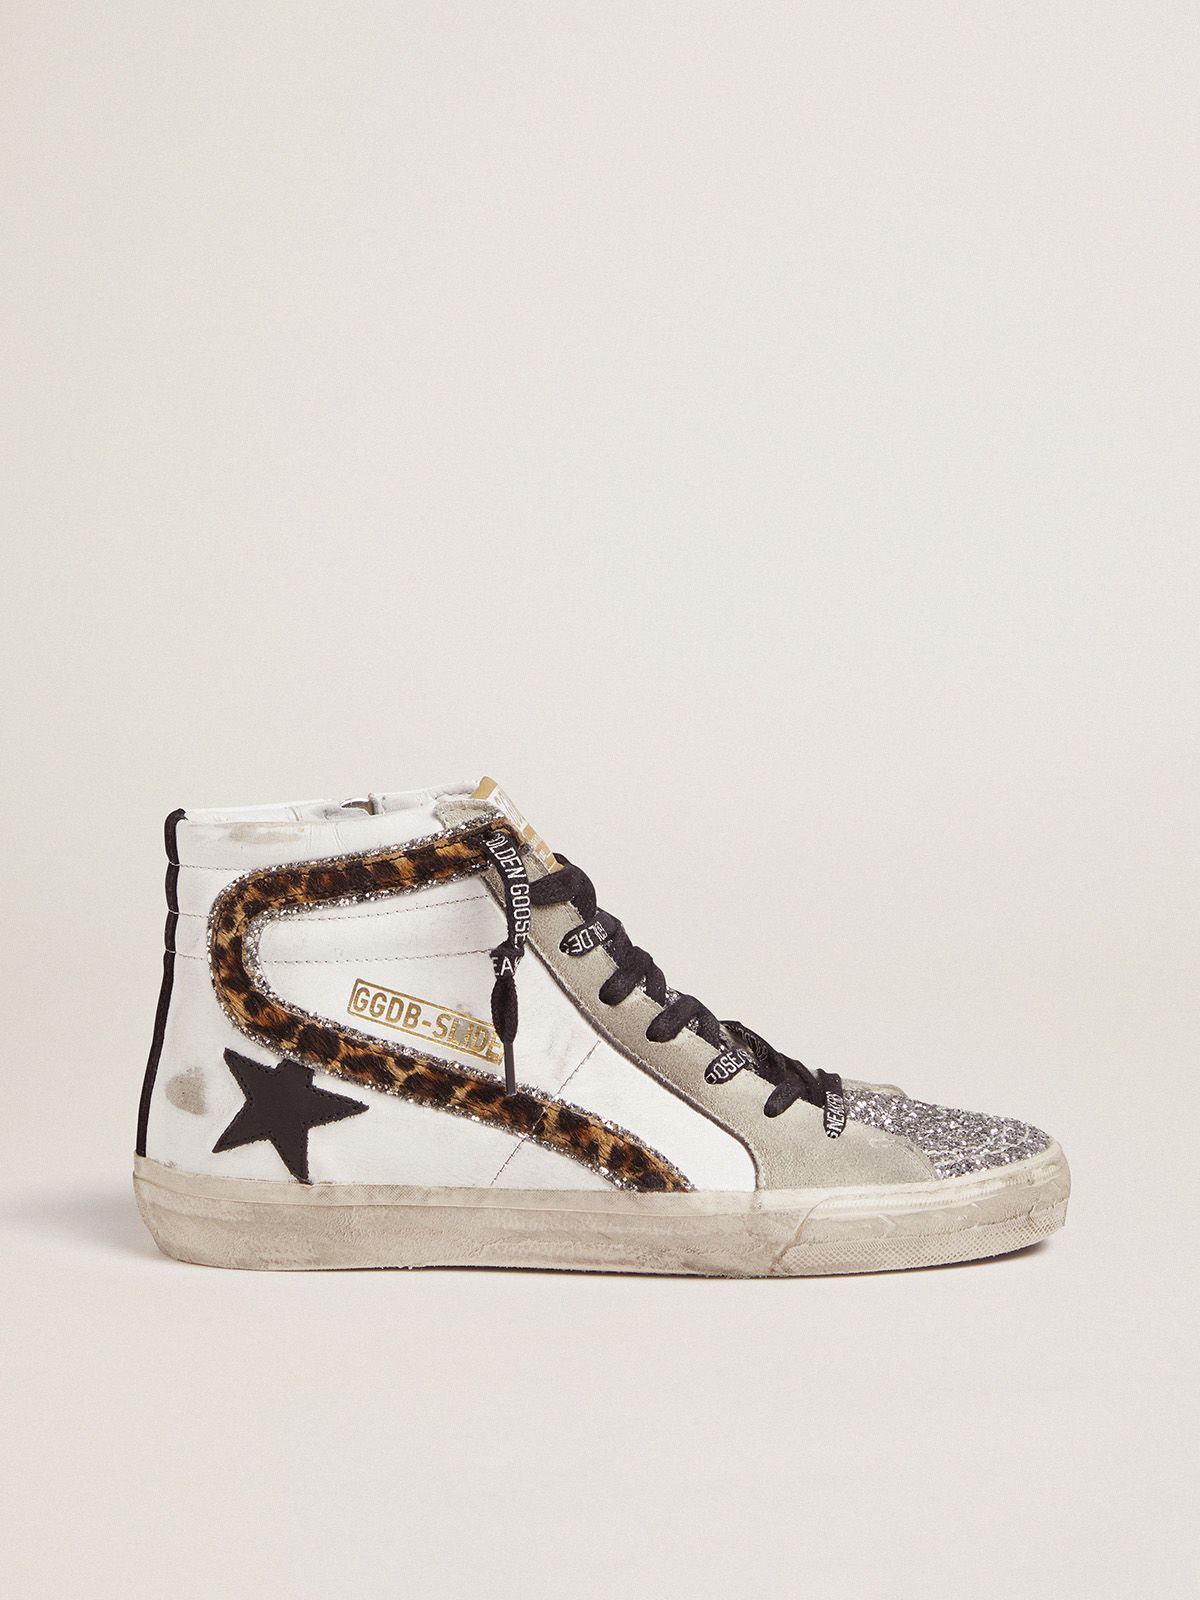 Golden Goose Bambina Slide sneakers with glitter and leopard-print flash